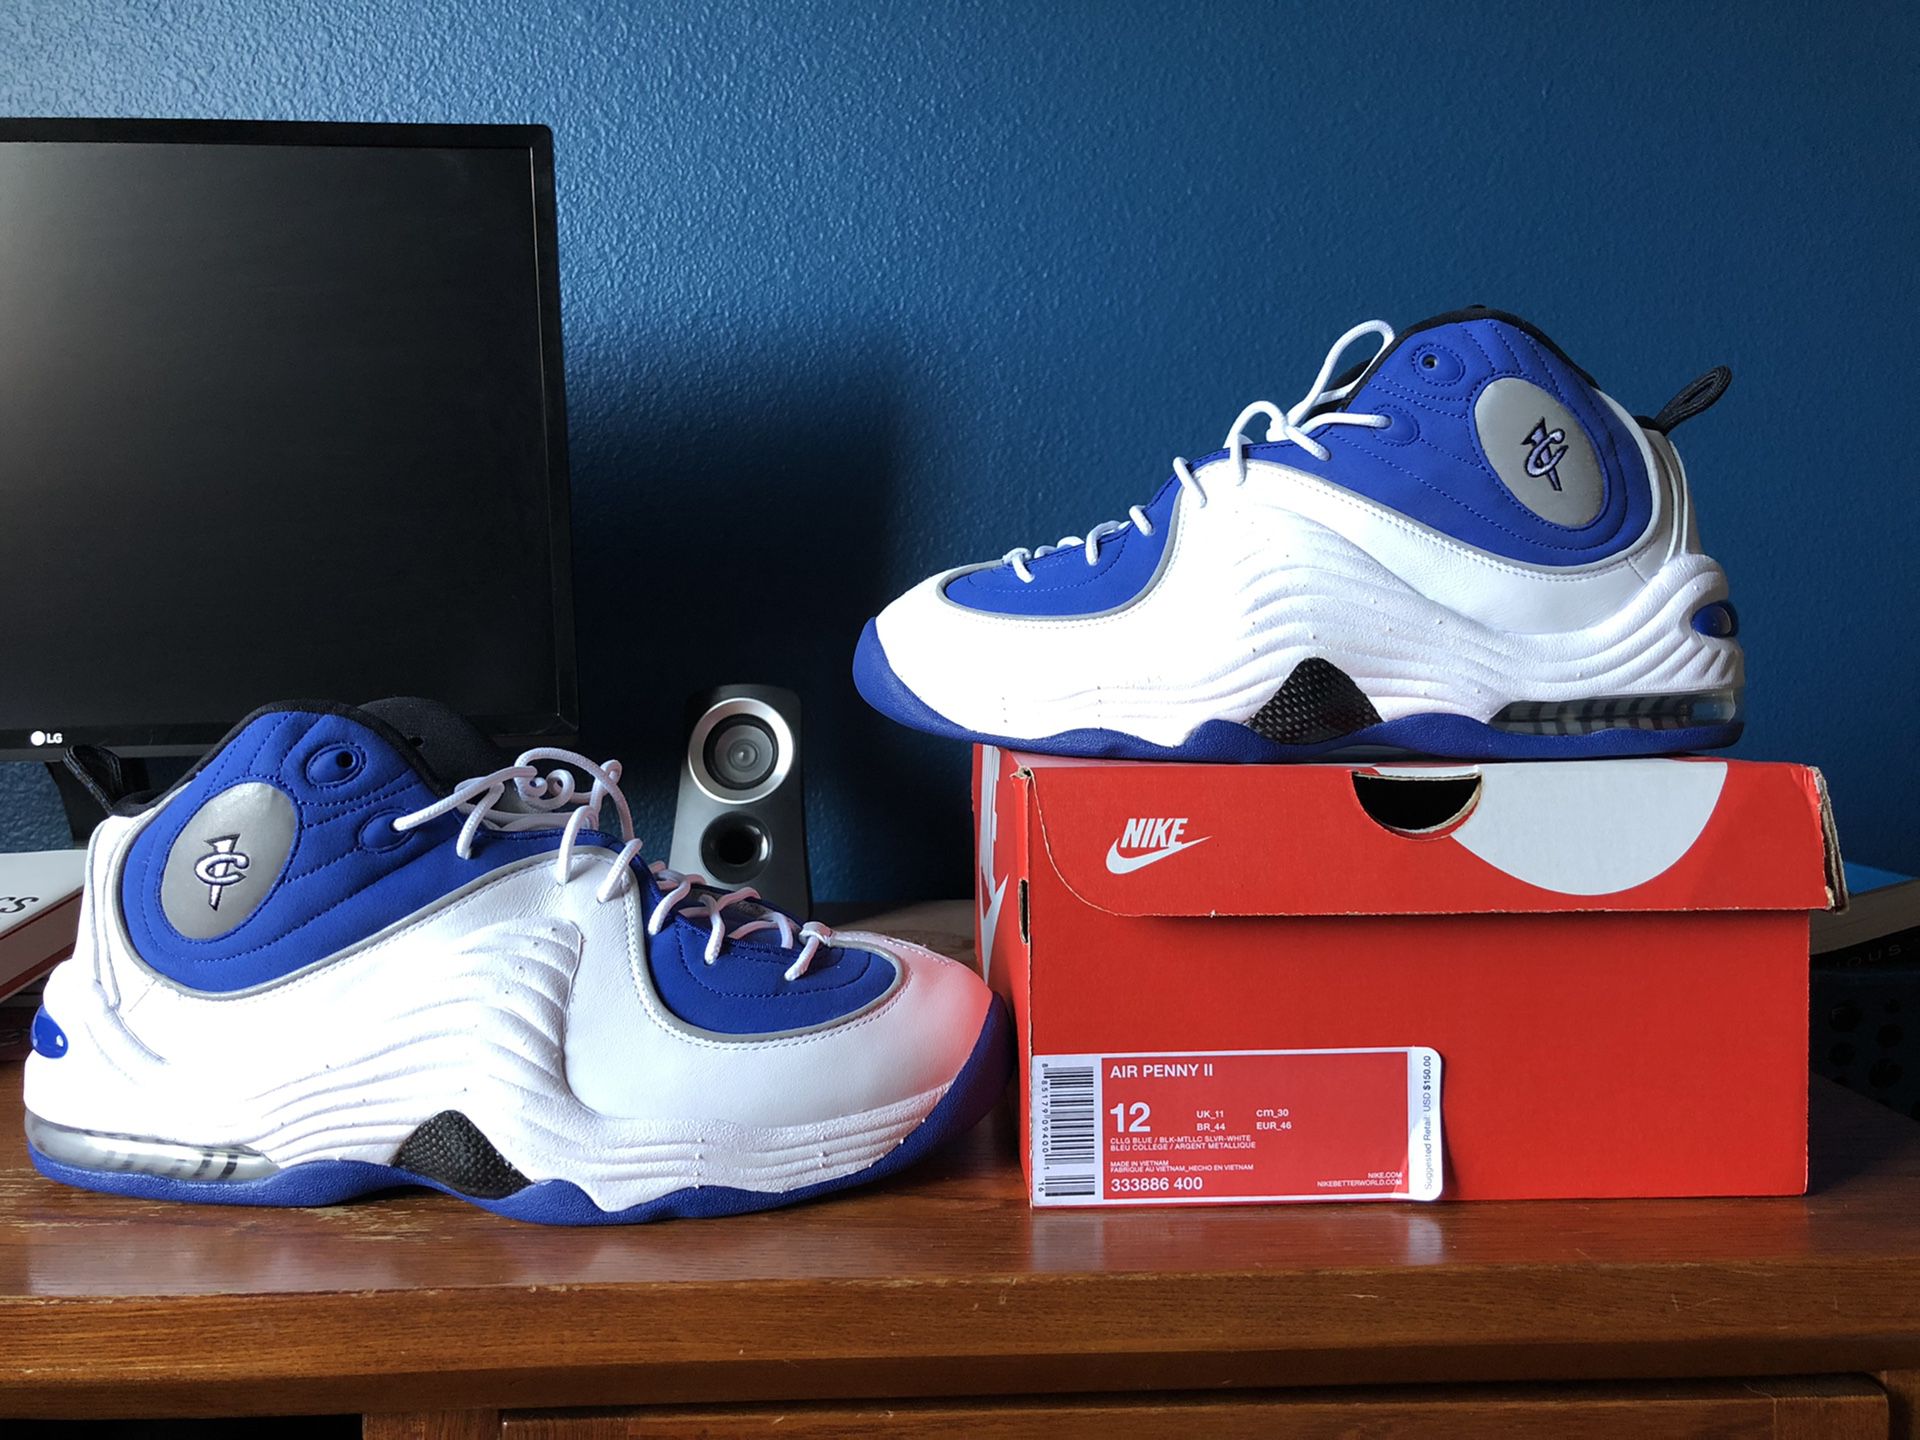 Nike penny 2 size 12 white, blue new version